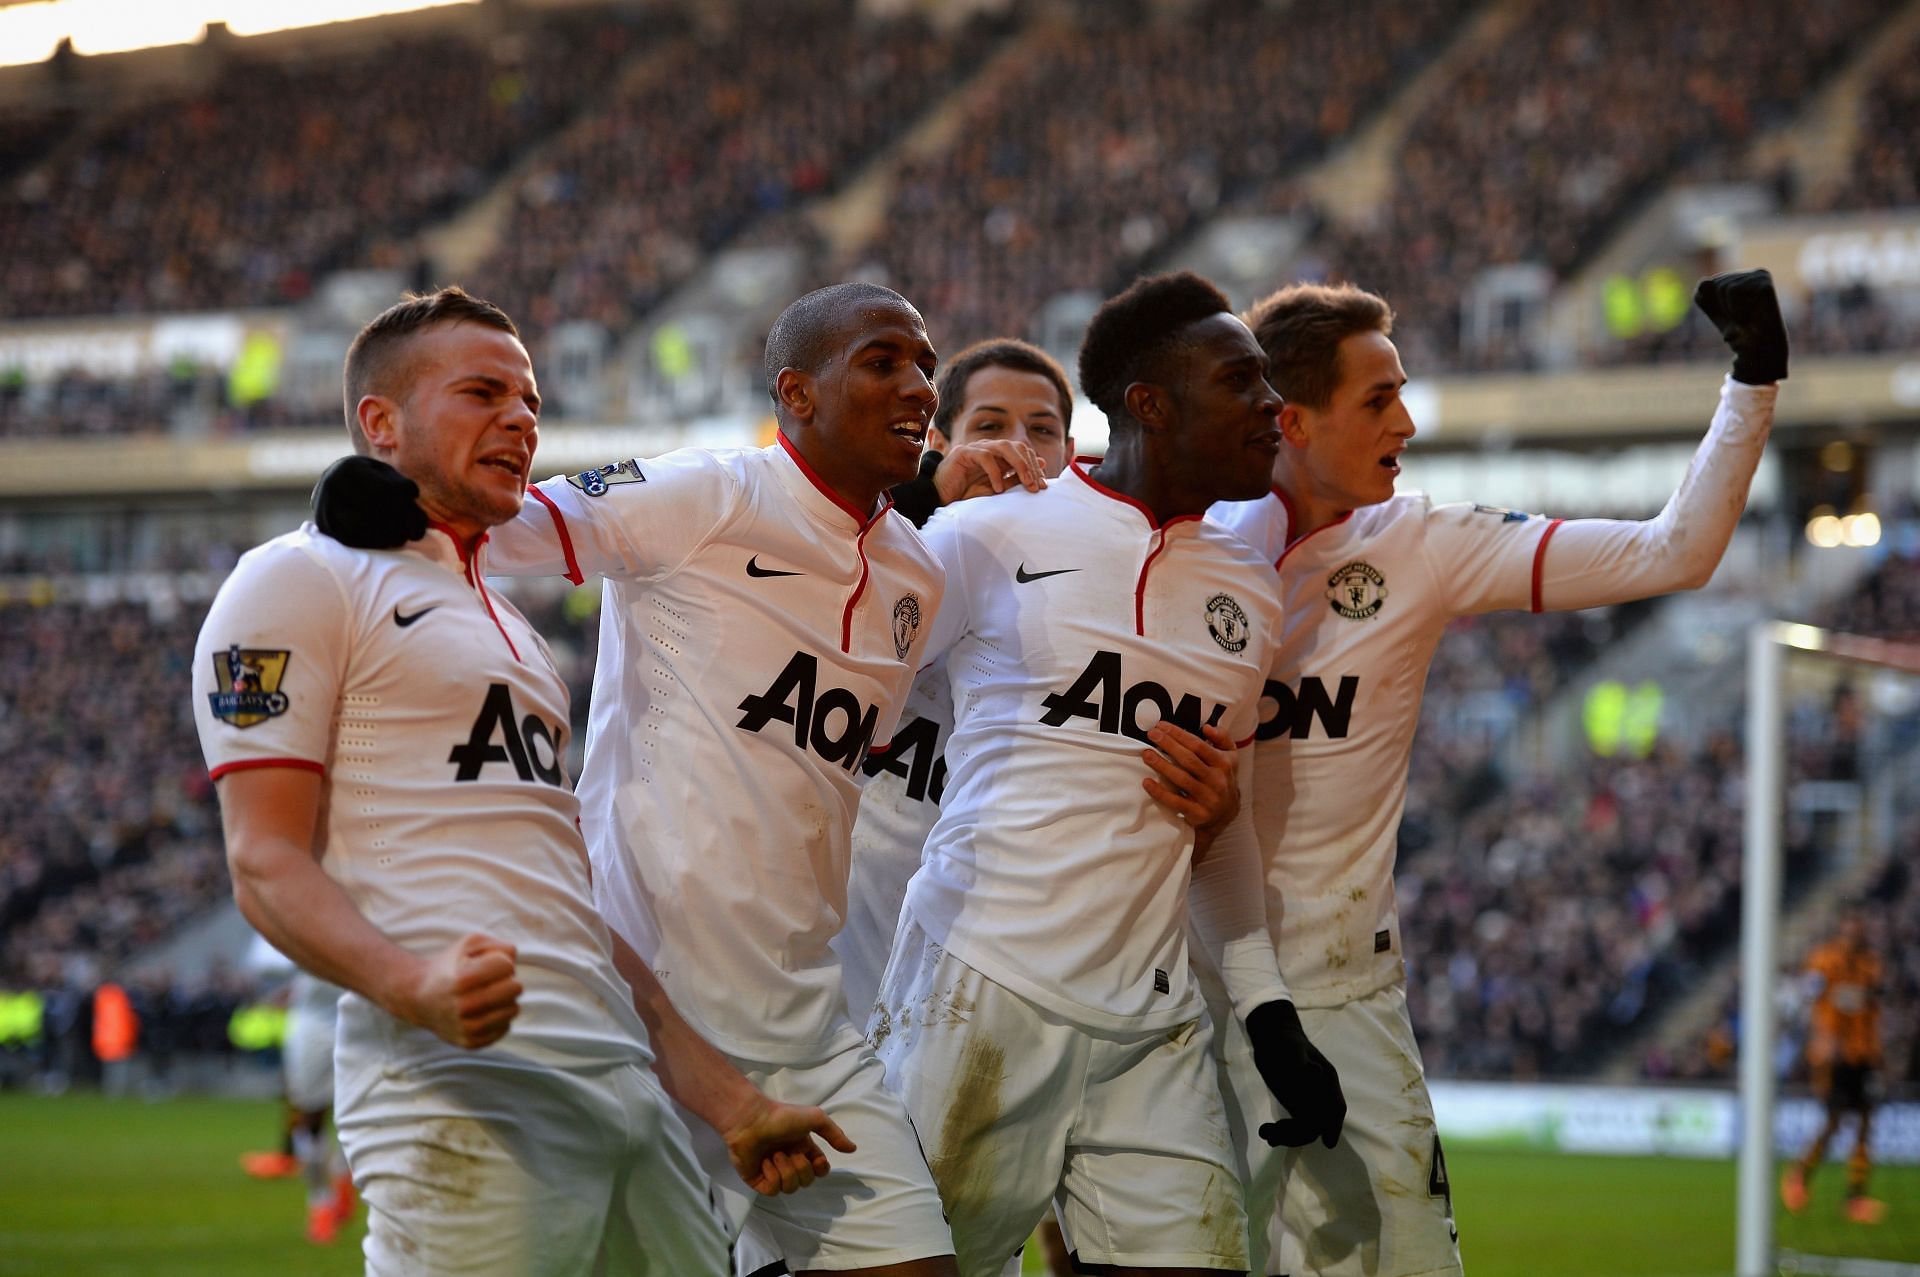 Hull City vs Manchester United - Premier League Boxing Day